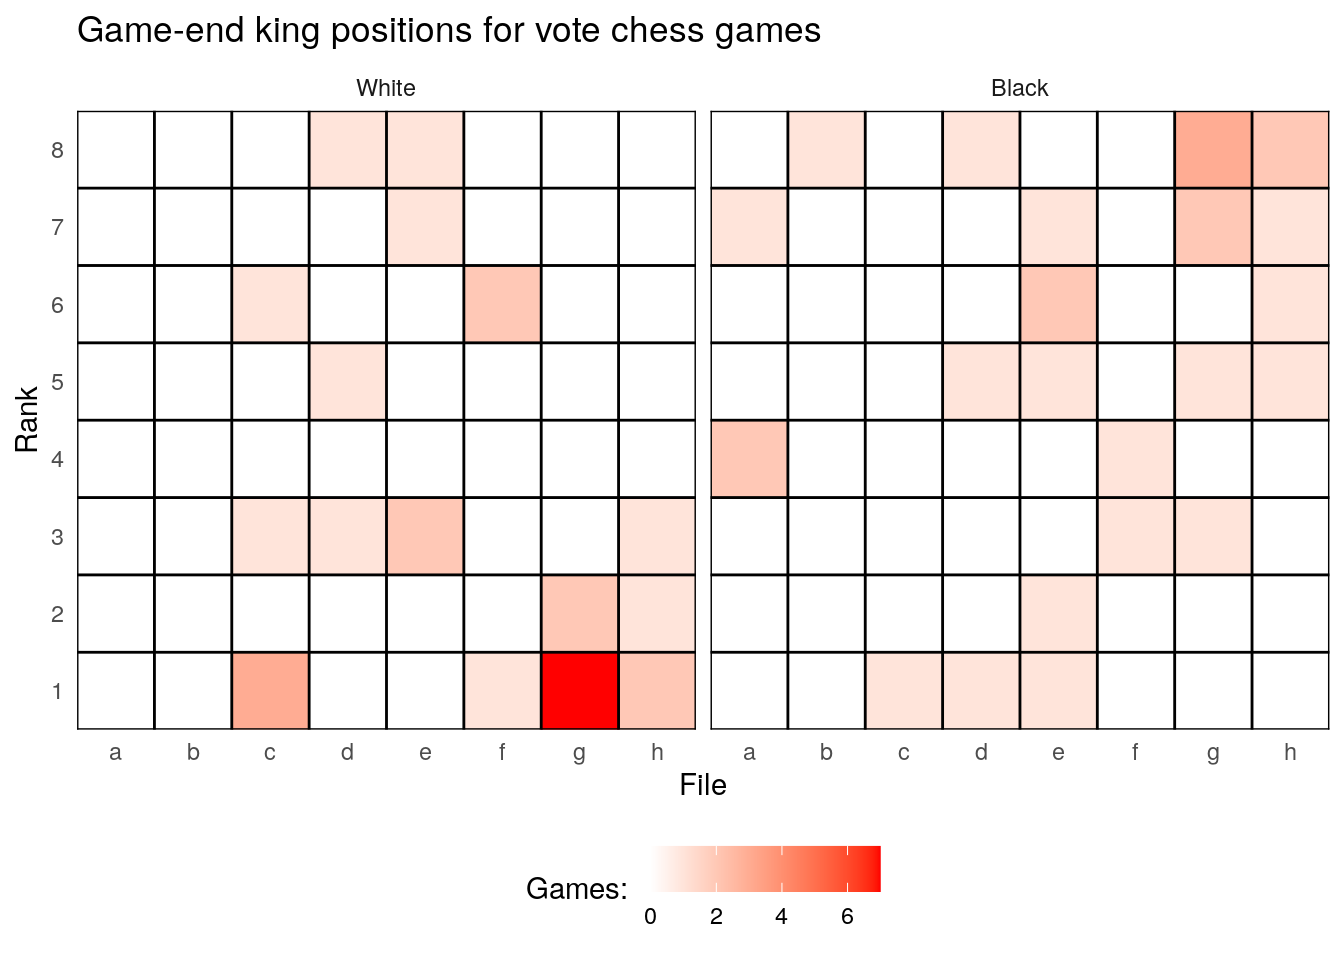 Game-end king positions for vote chess games